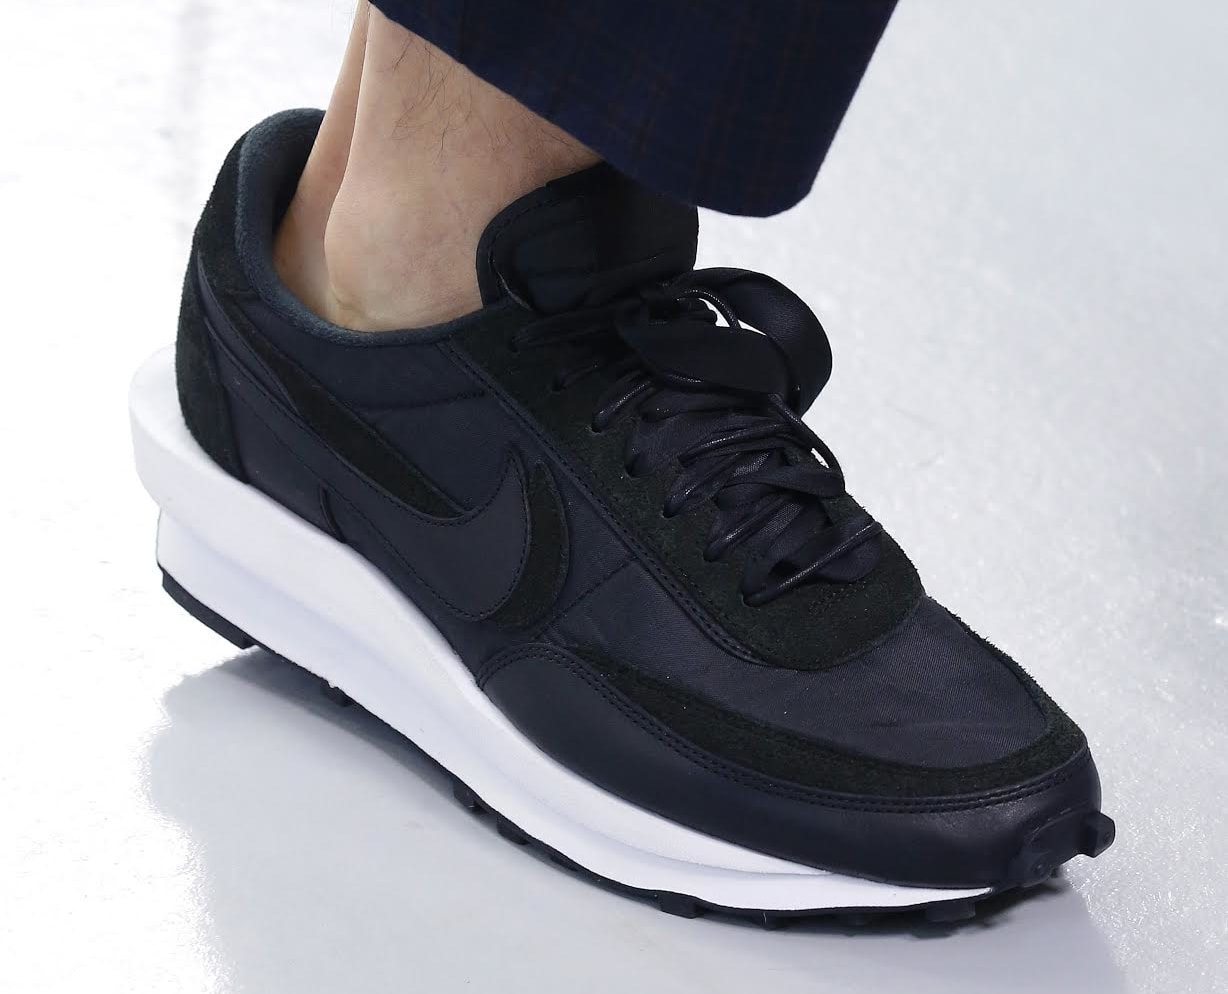 A New Version of the Sacai x Nike LDWaffle Debuted at Paris 